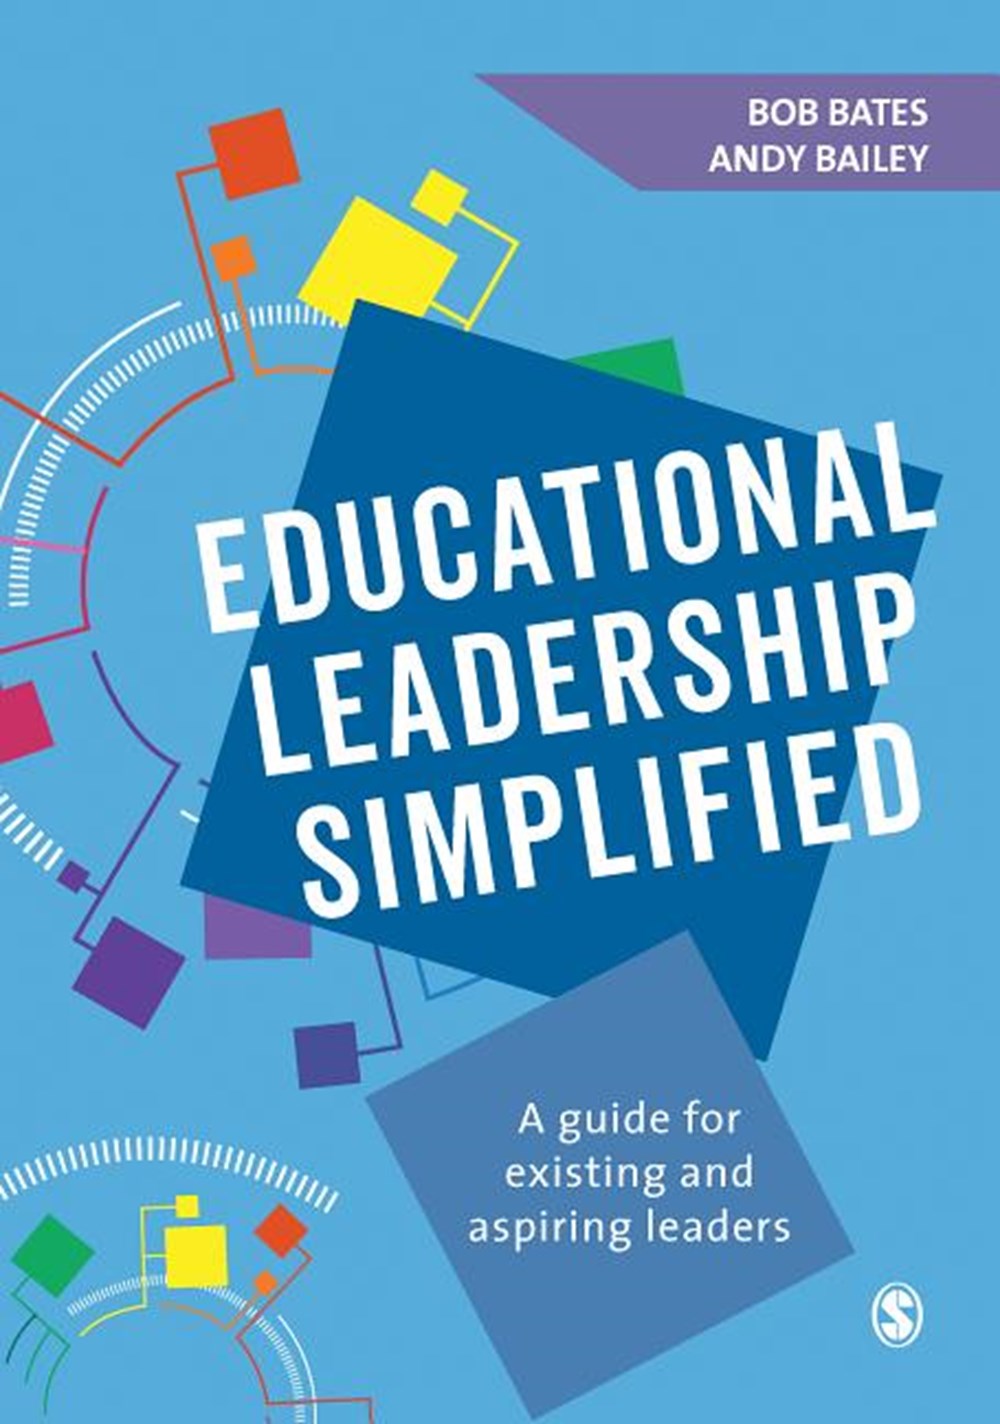 Educational Leadership Simplified: A Guide for Existing and Aspiring Leaders